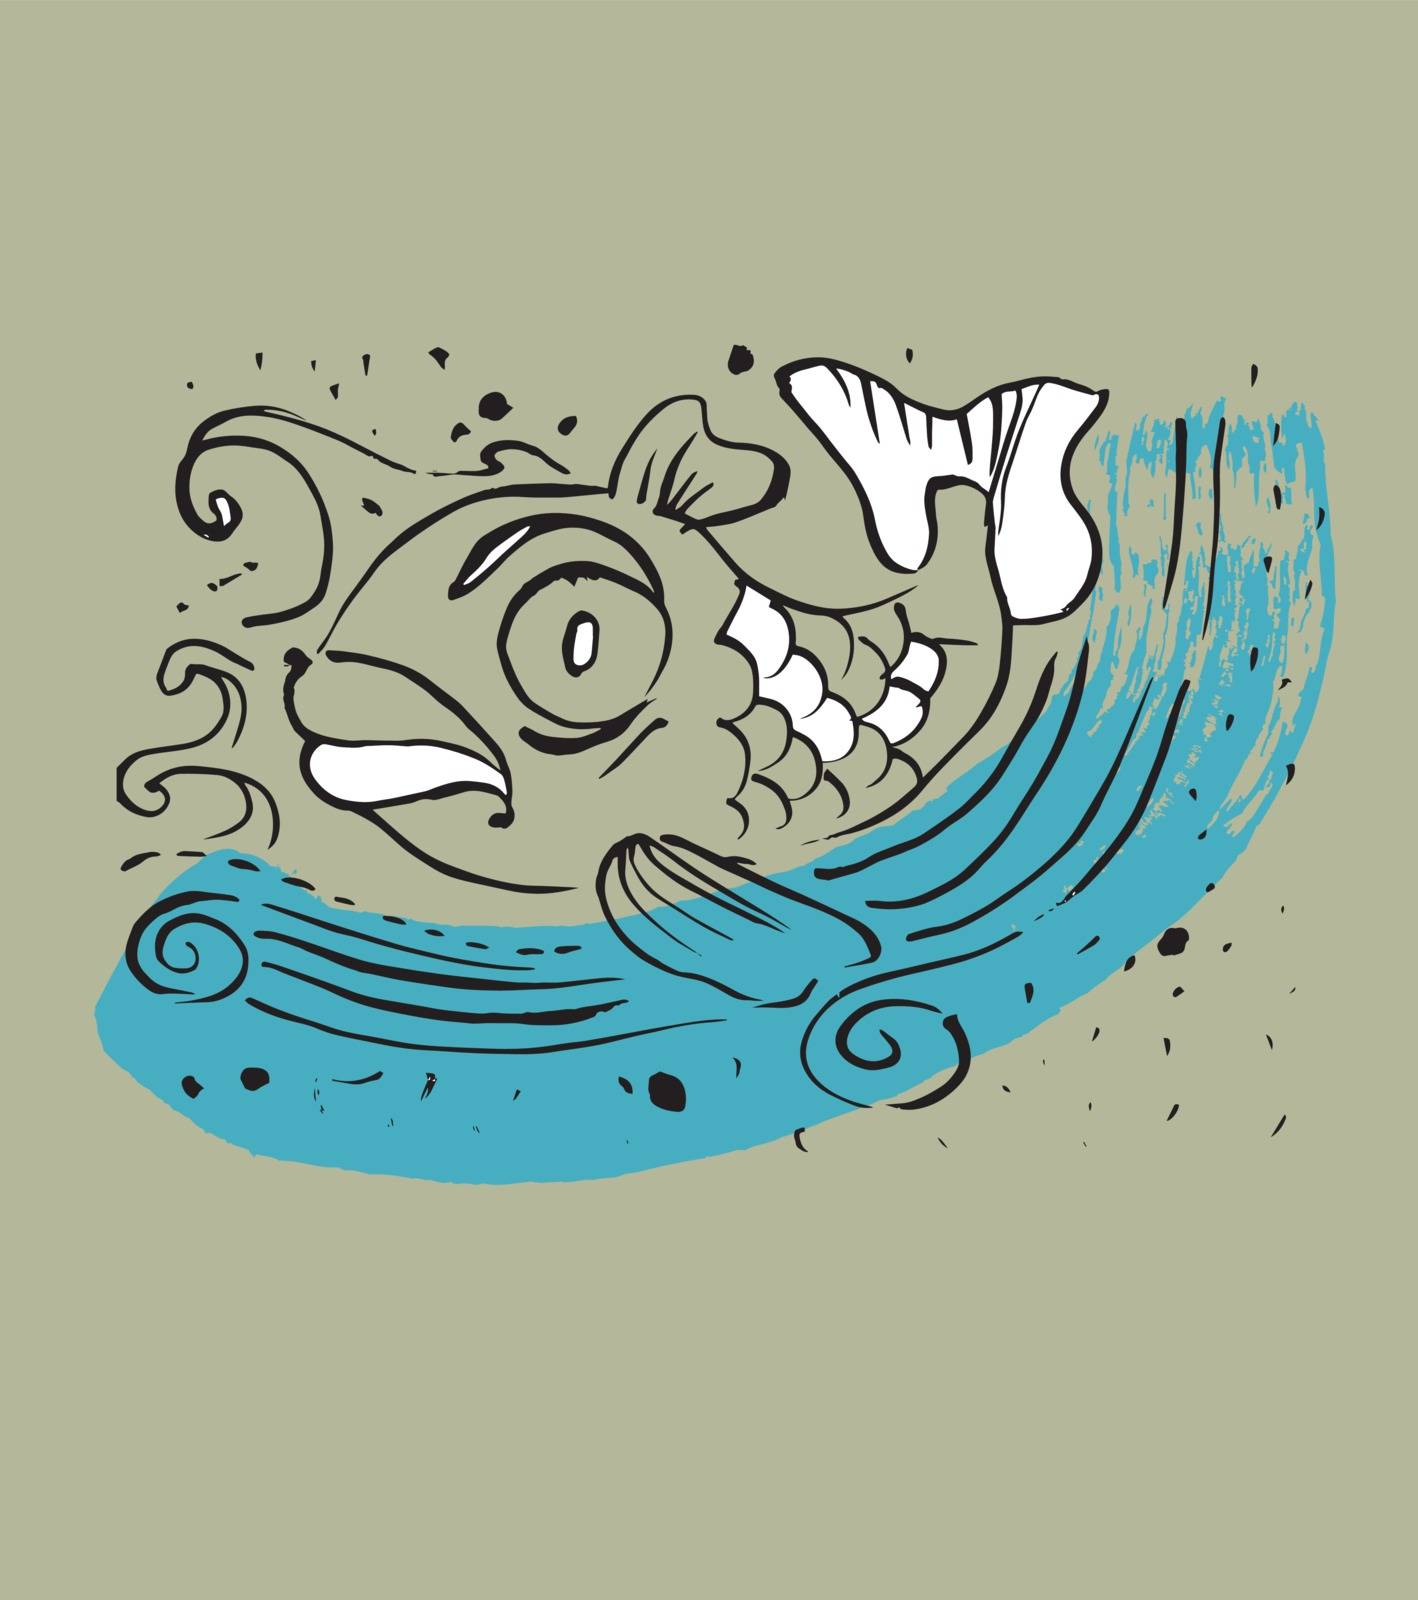 Hand drawn vector illustration or drawing of an angry fish